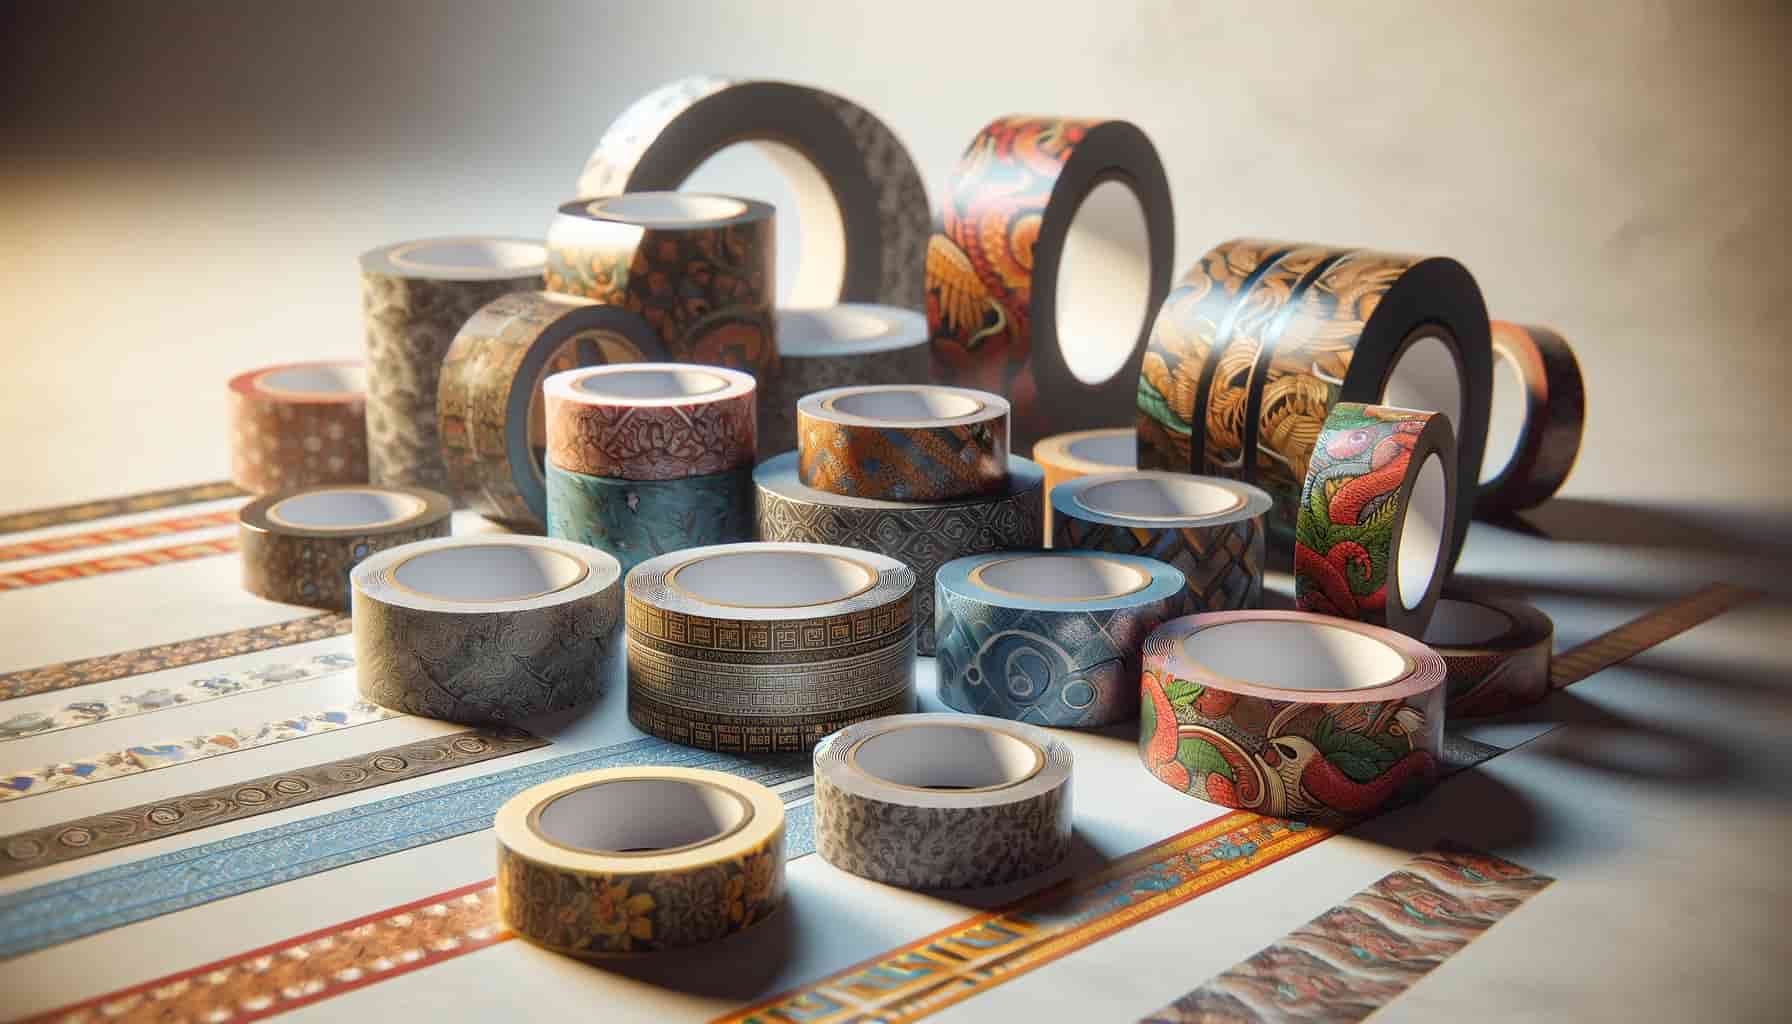 A collection of decorative adhesive tapes with various intricate patterns and colors, neatly arranged on a patterned surface with soft lighting casting gentle shadows.